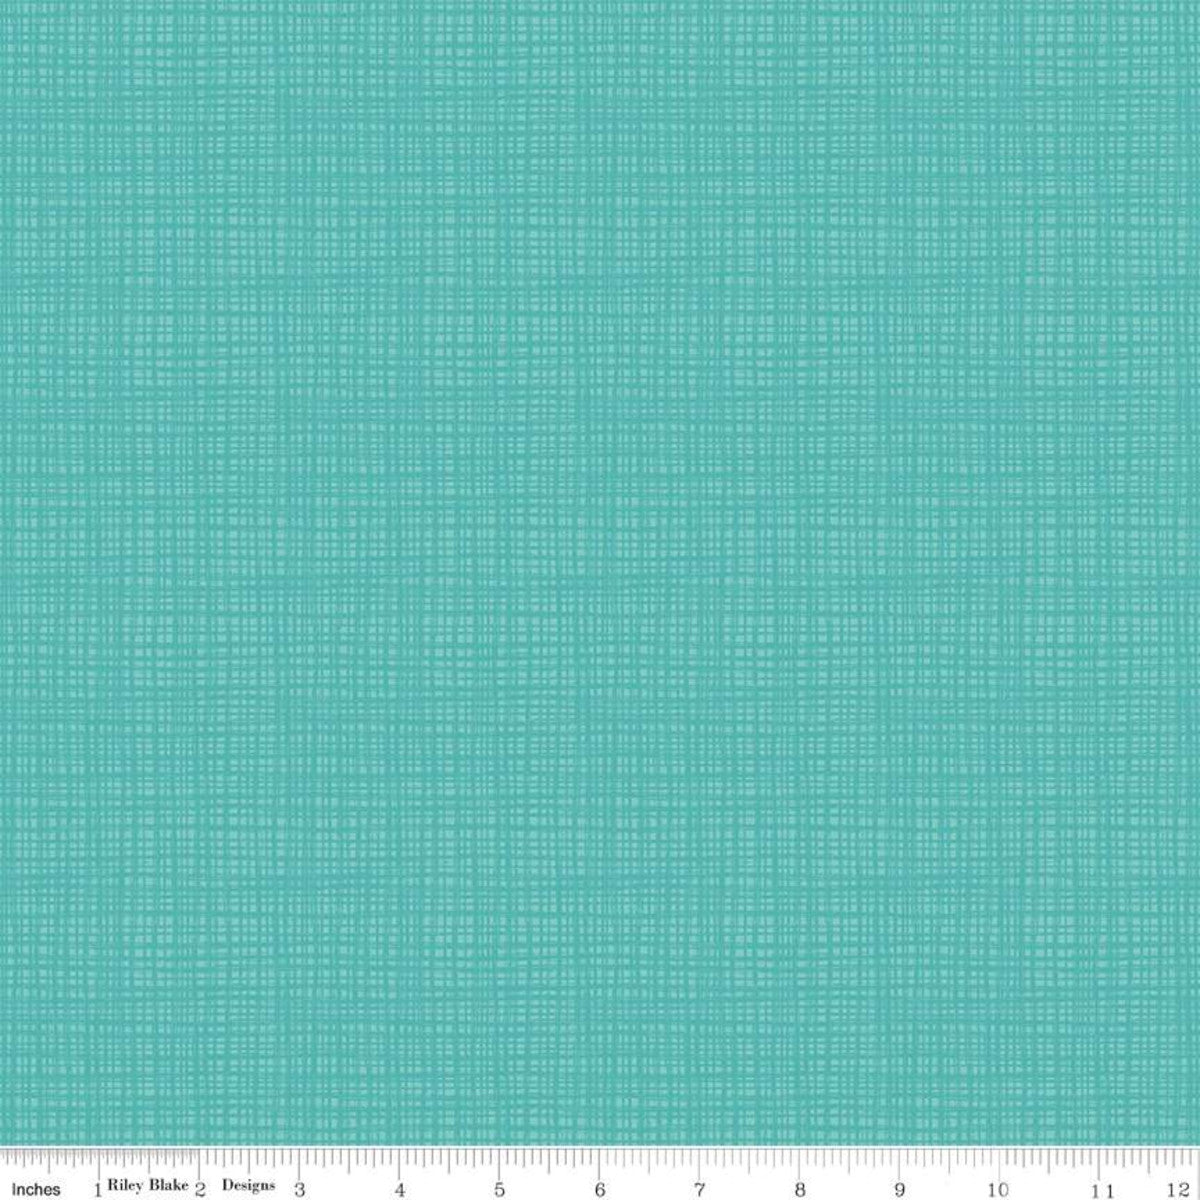 Quilting, Riley Blake, Sewing Texture Fabric, Texture Fabric, Quilting Fabric, Quilting cotton, Texture from Riley Blake, 100% Cotton, Sewing, Embroidery, Quilt Shop Fabric, Glacier